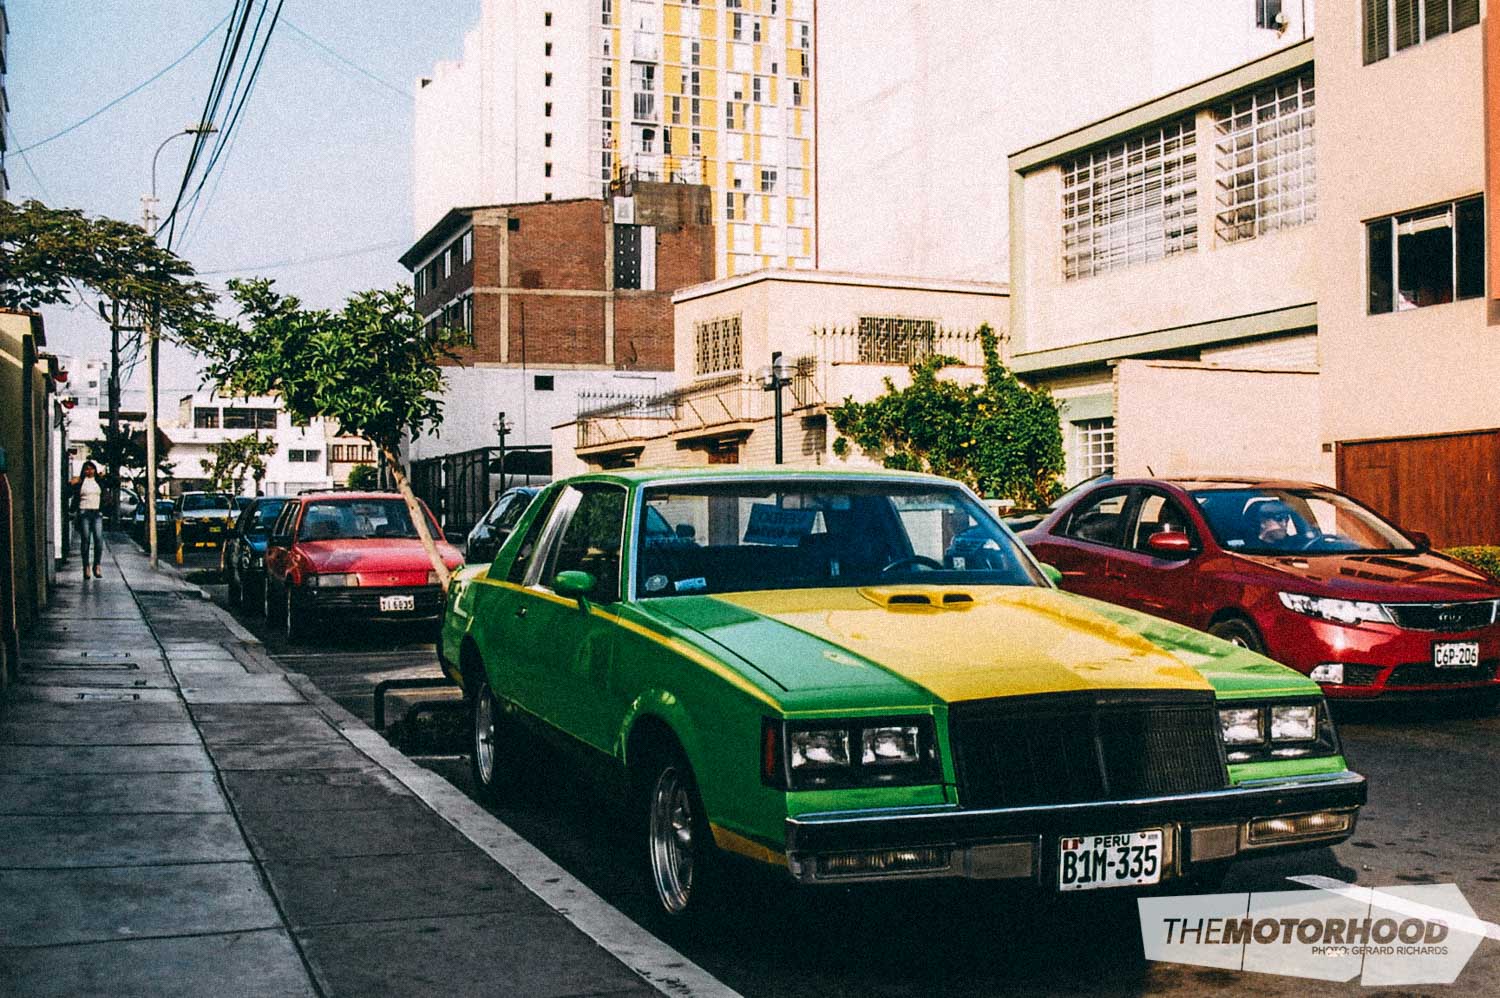 This customized and ‘restored’ car was for sale in Lima — looks like it could be a mid-to-late-’70s Oldsmobile